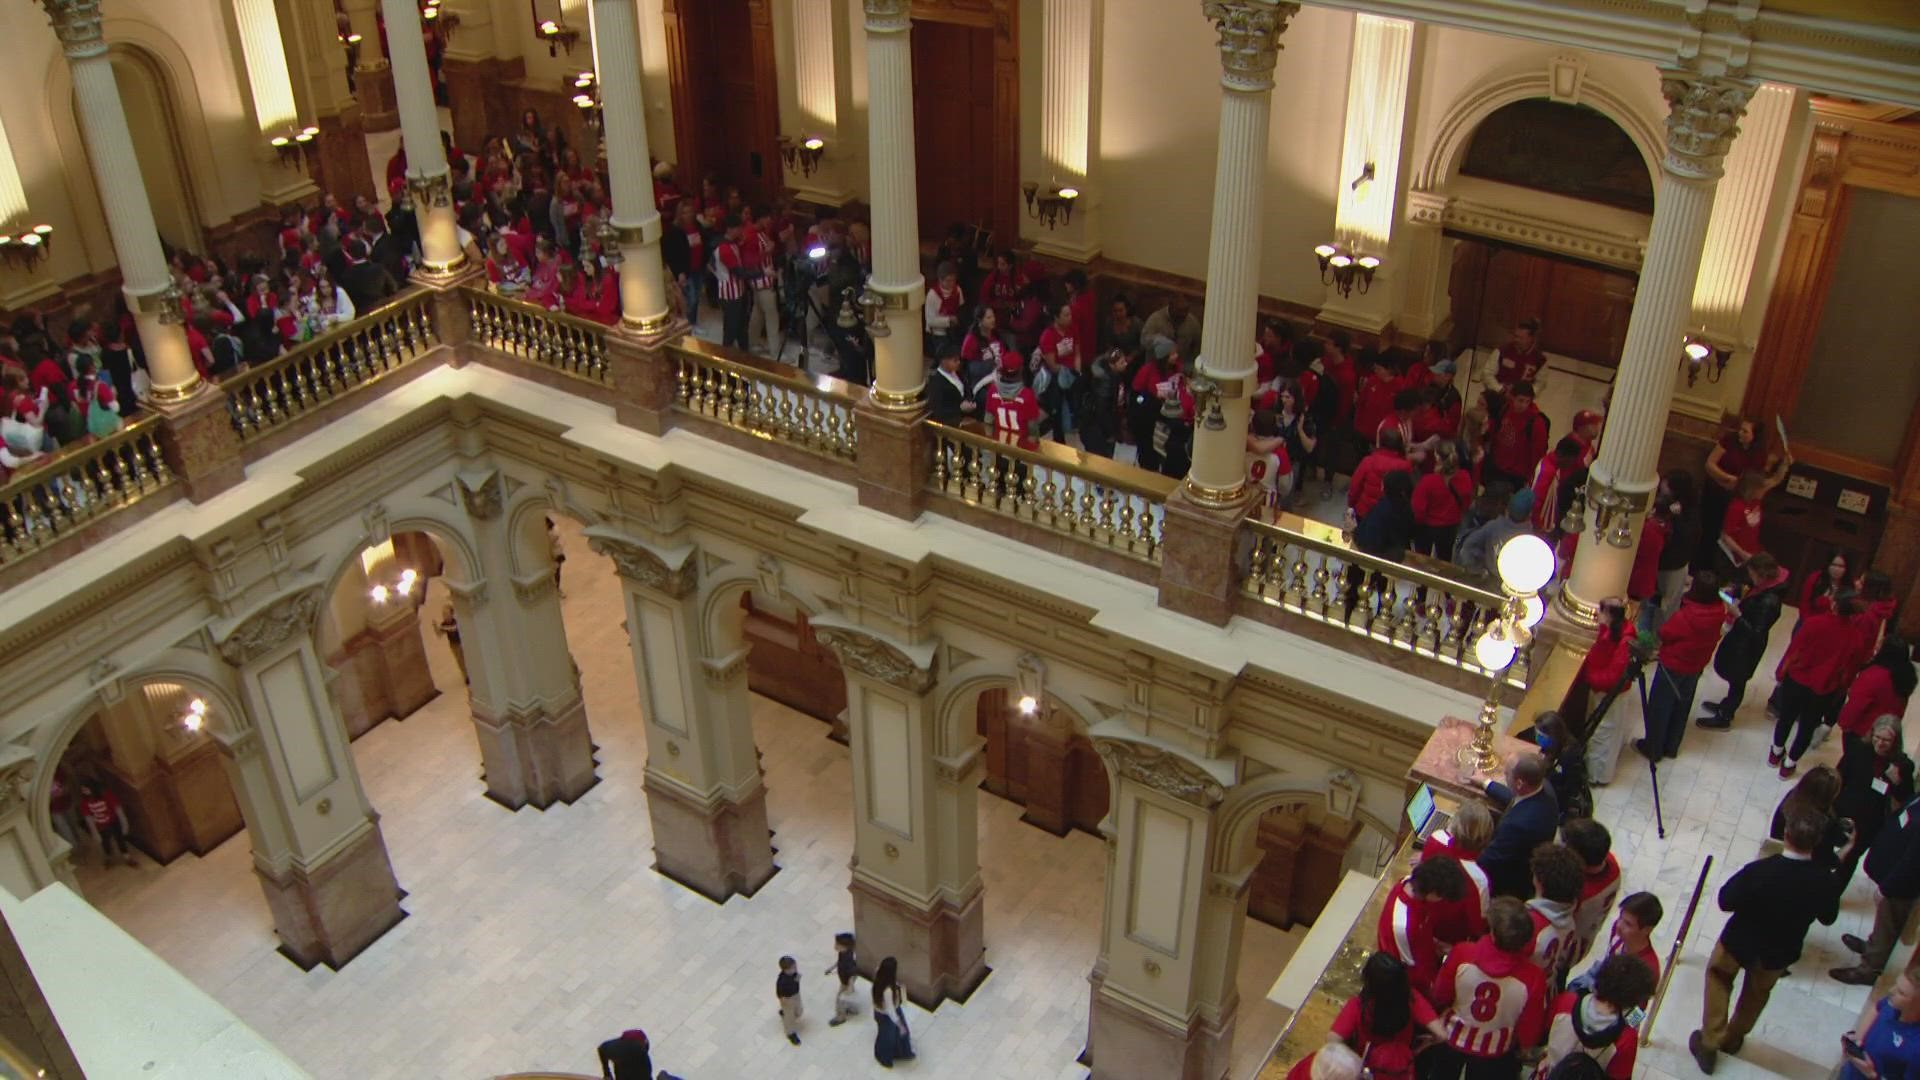 Students walked out at 8 a.m. Friday and went to the Capitol to rally for gun safety solutions.